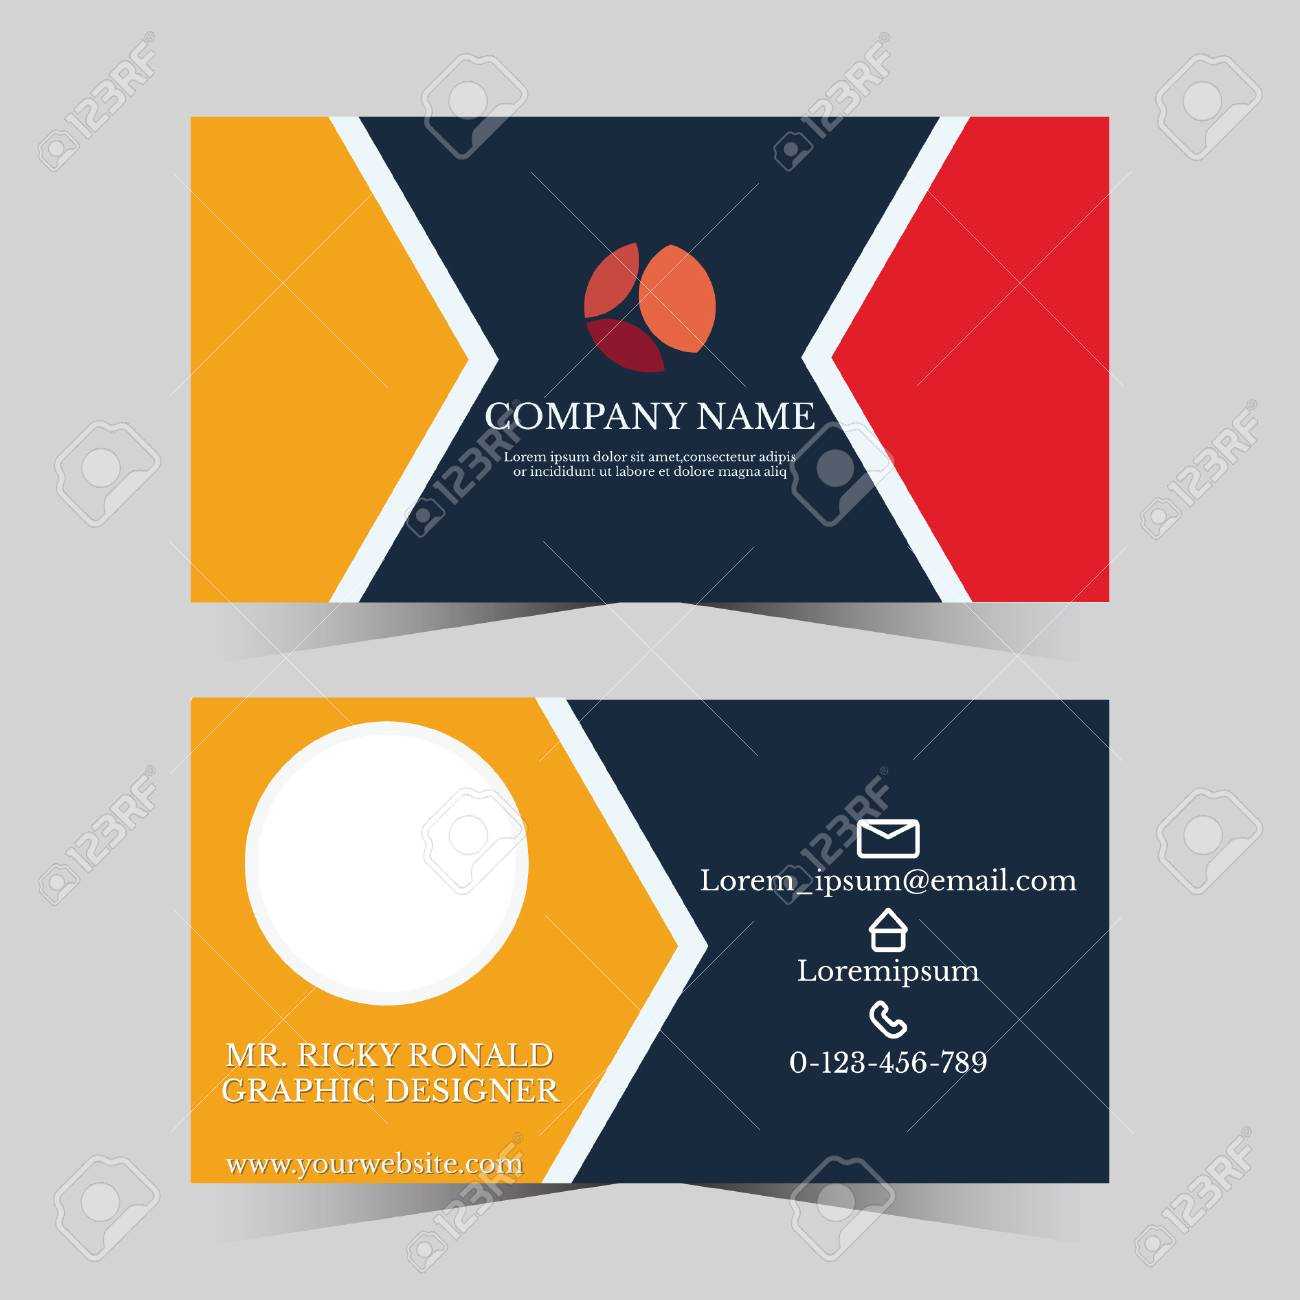 Calling Card Template For Business Man With Geometric Design Inside Template For Calling Card